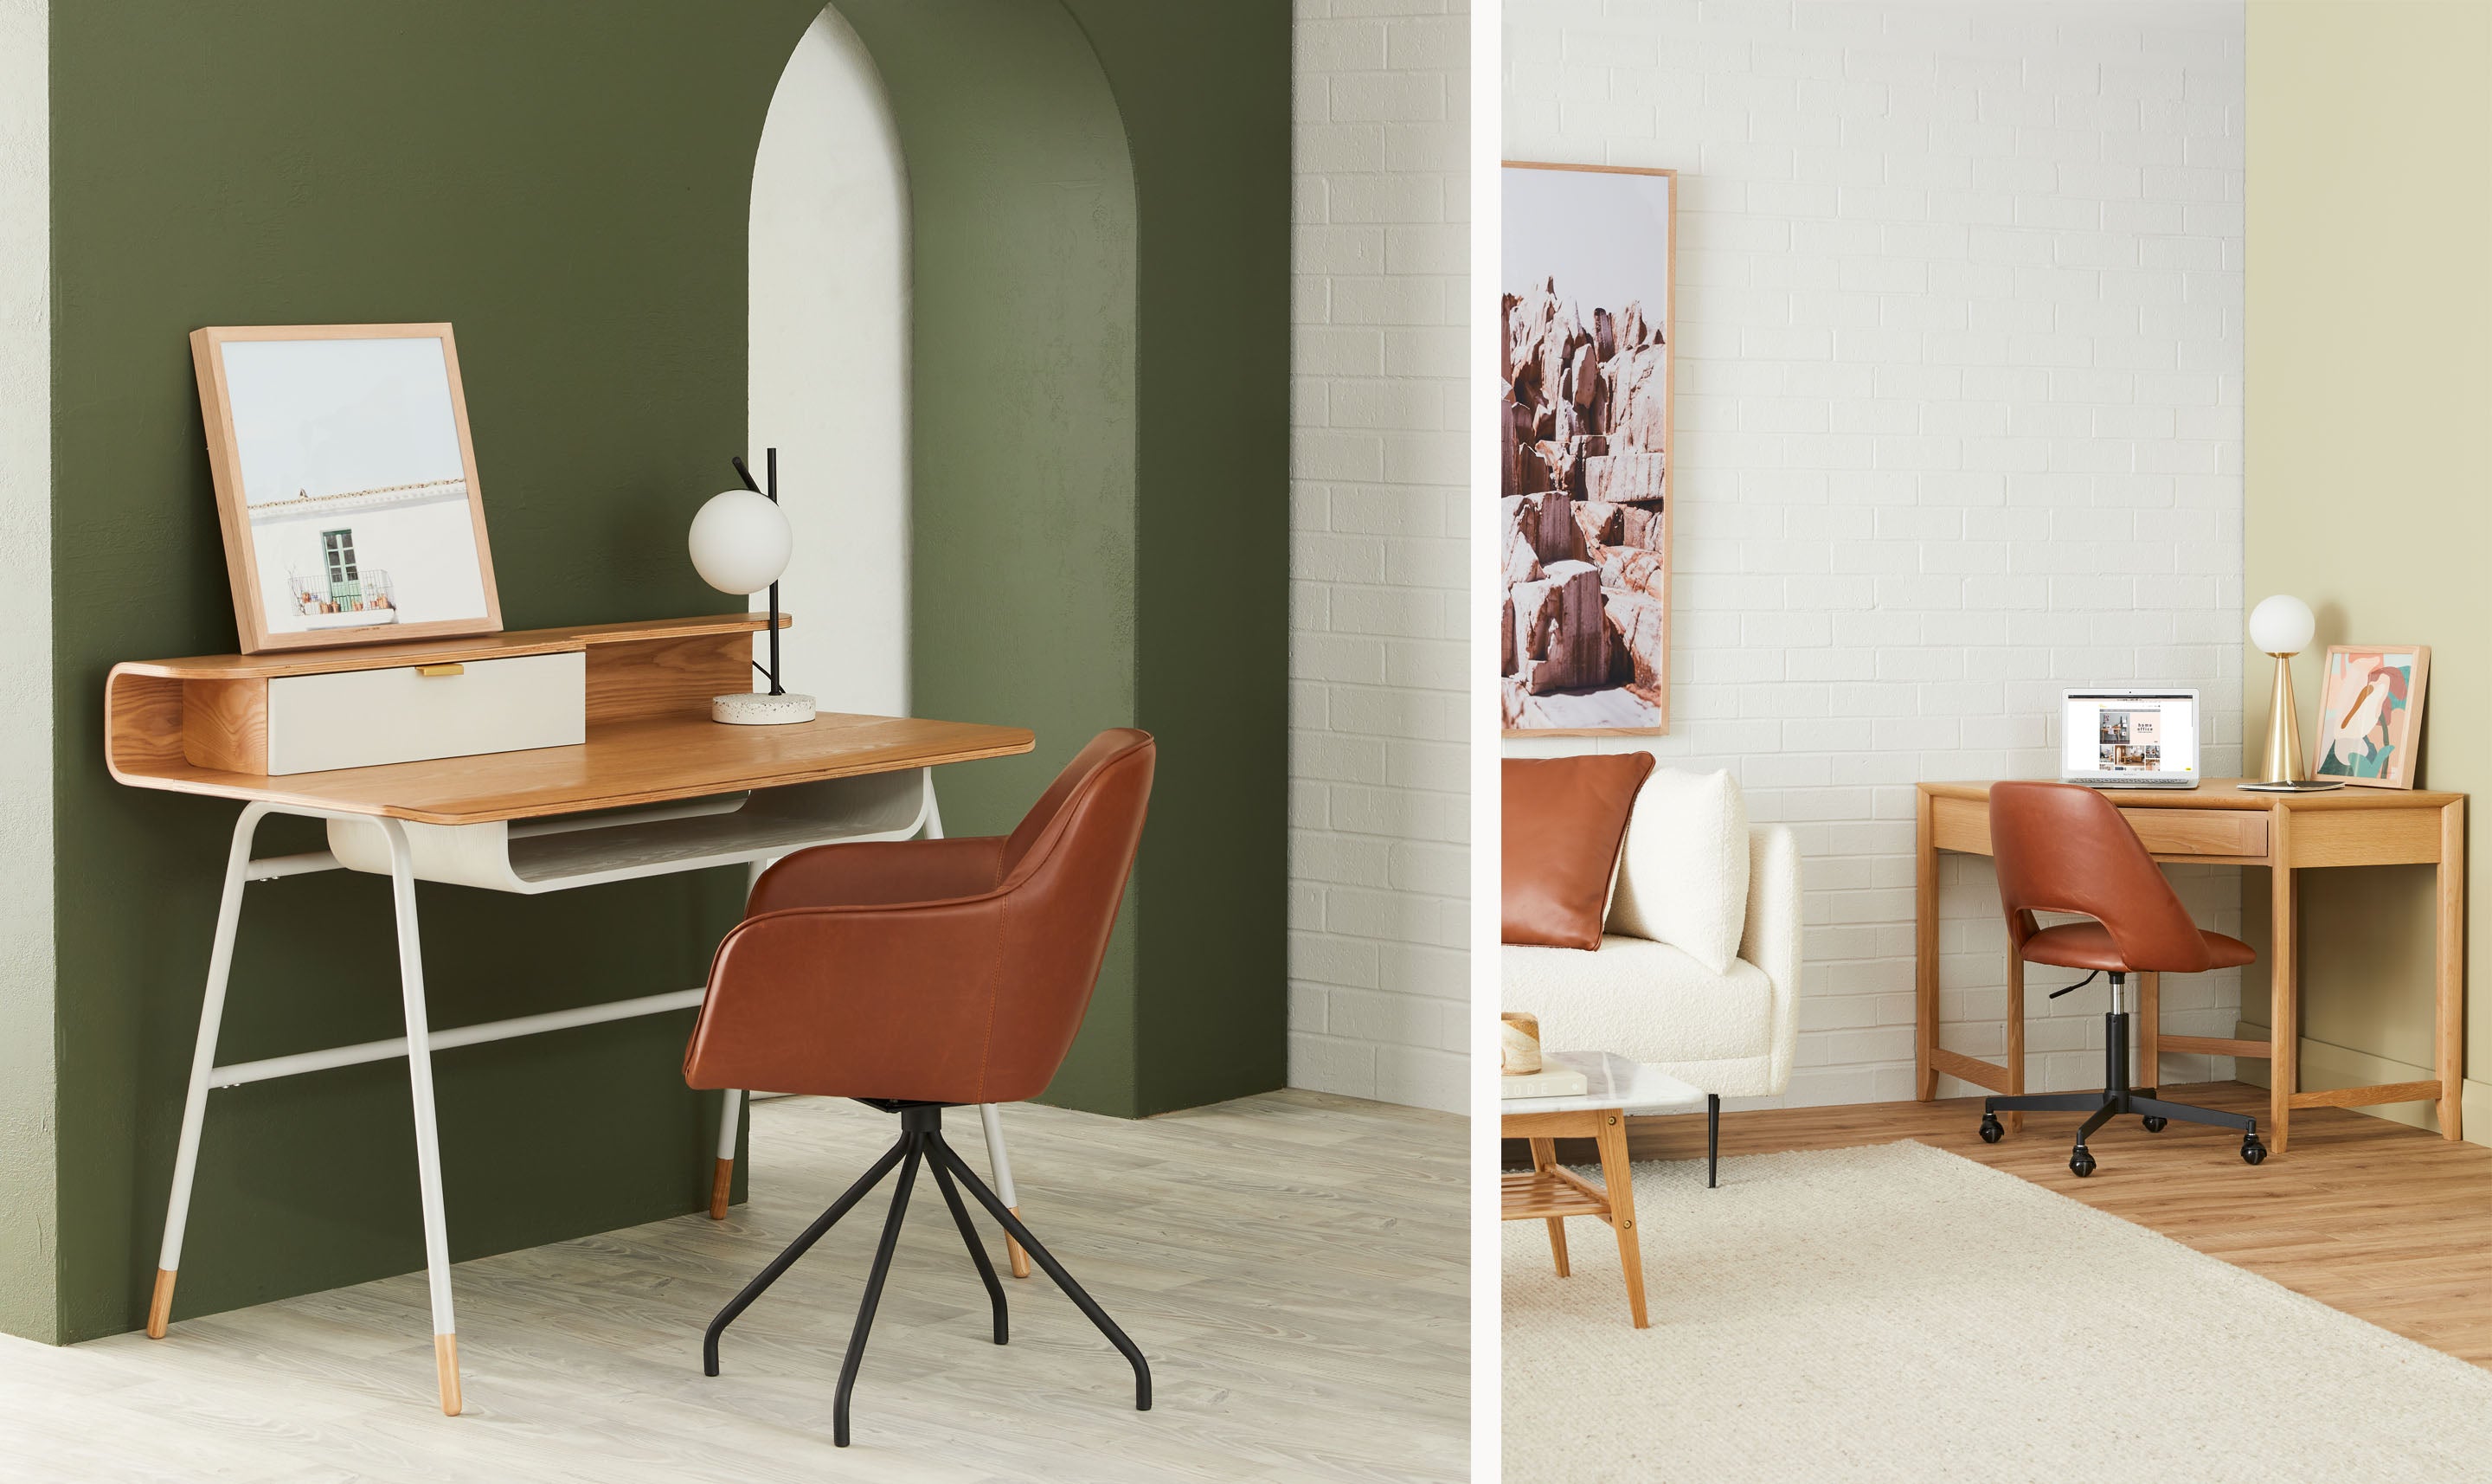 Shop our range of home office furniture in Sydney, Melbourne and online.